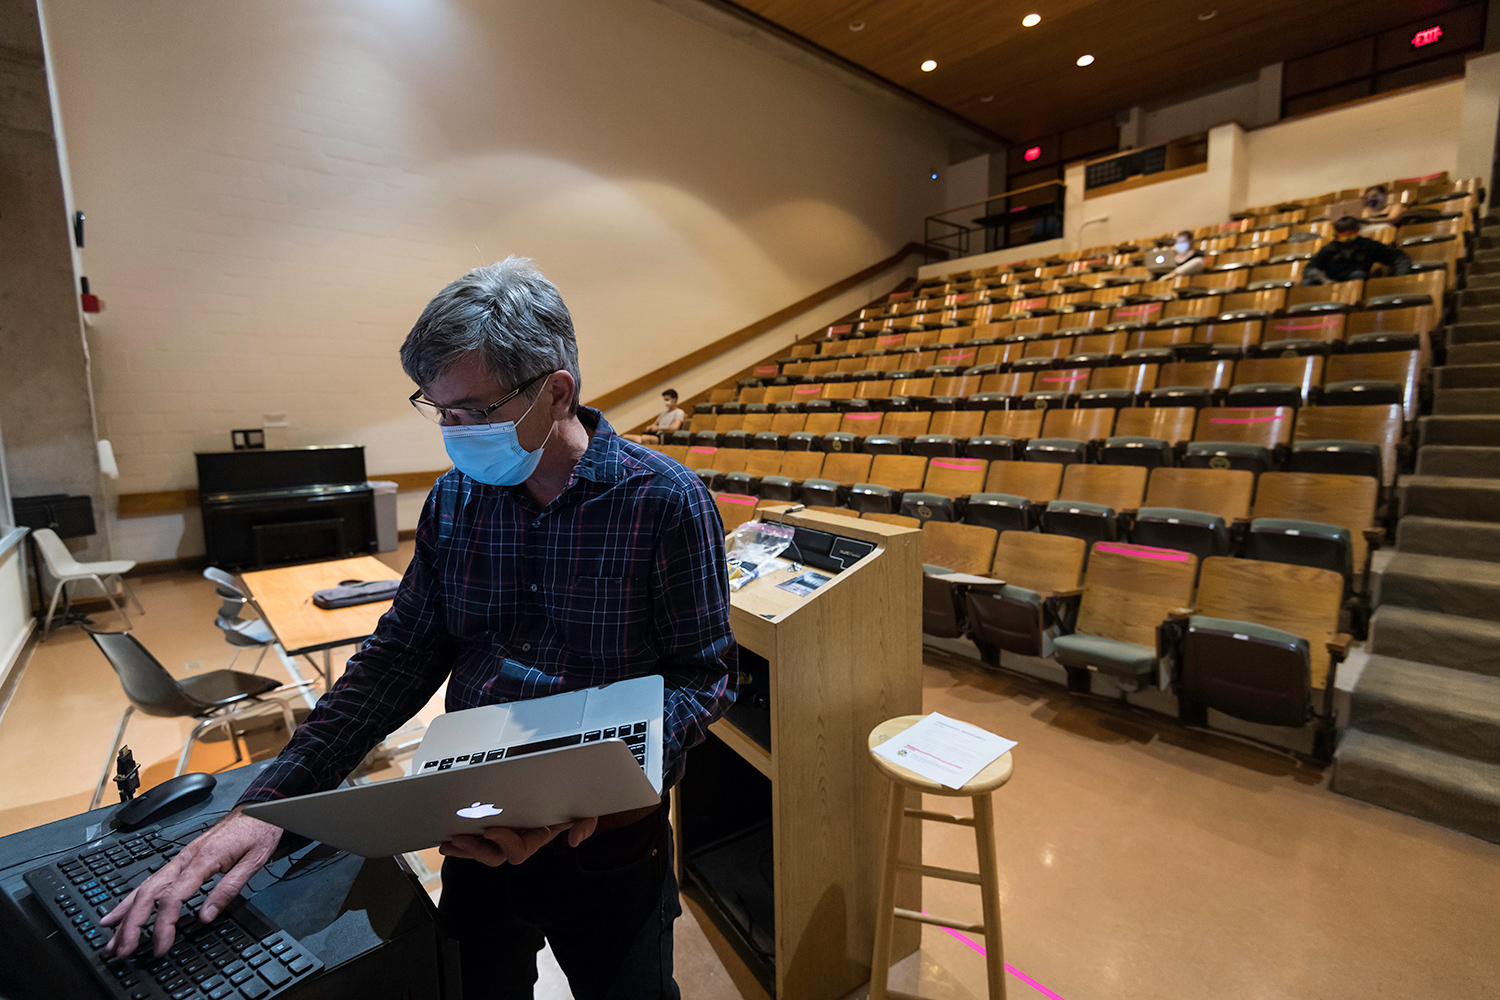 Robert Minckley holds a laptop while working on another computer at the front of a large empty lecture hall.